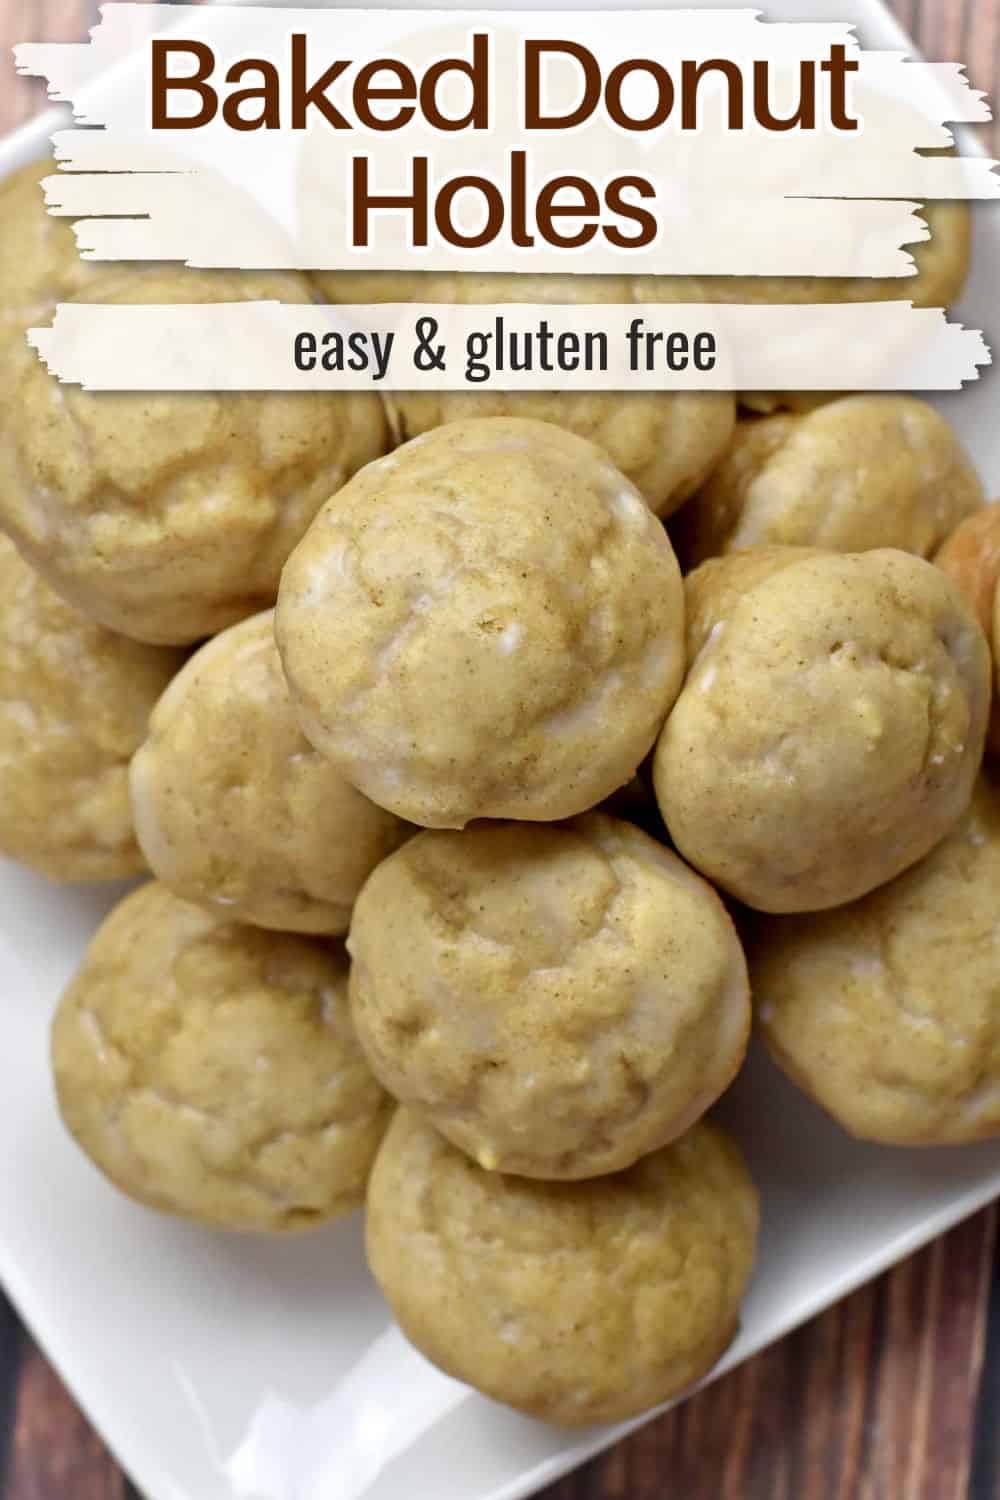 Baked gluten free donut holes on a white plate with text overlay, "Baked Donut Holes, Easy & Gluten Free."